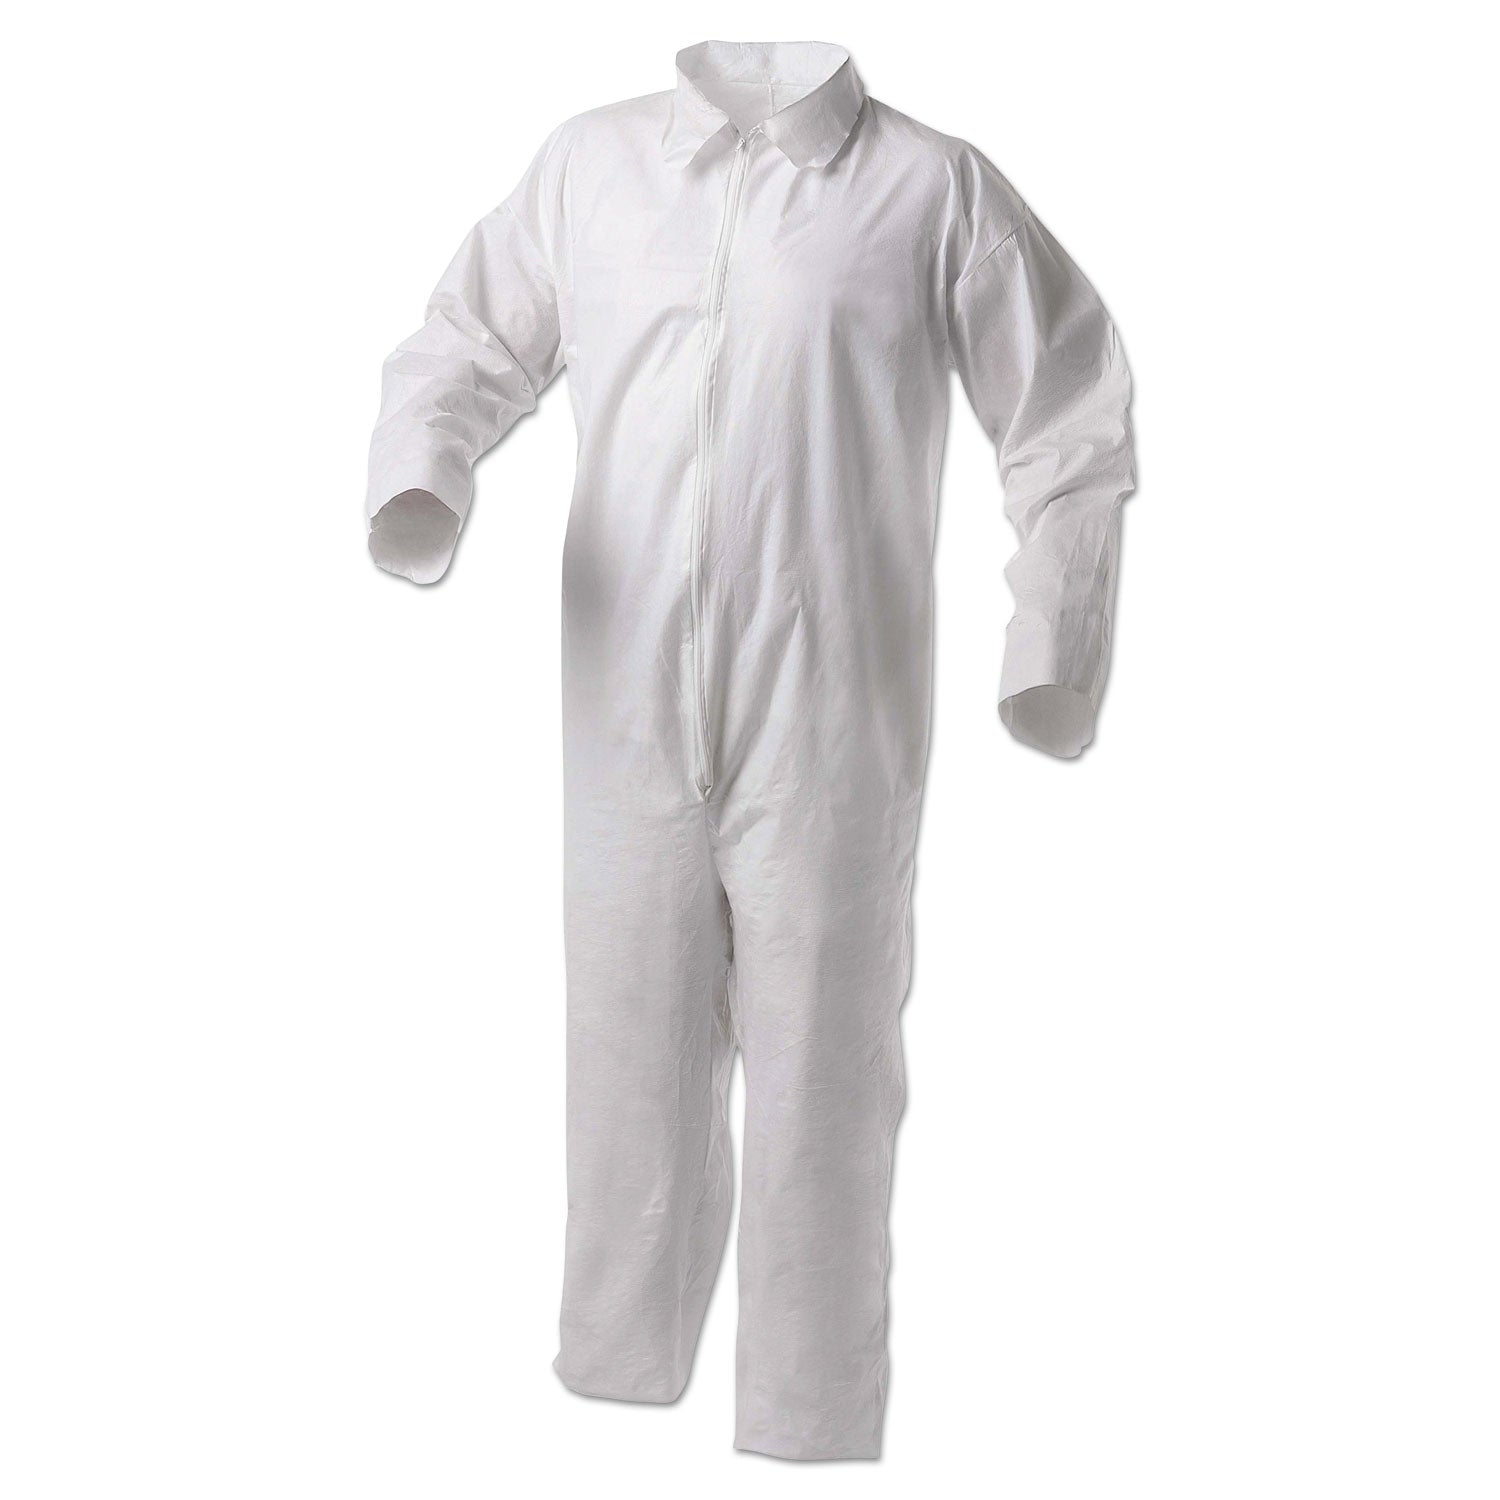 a35-liquid-and-particle-protection-coveralls-zipper-front-large-white-25-carton_kcc38918 - 1